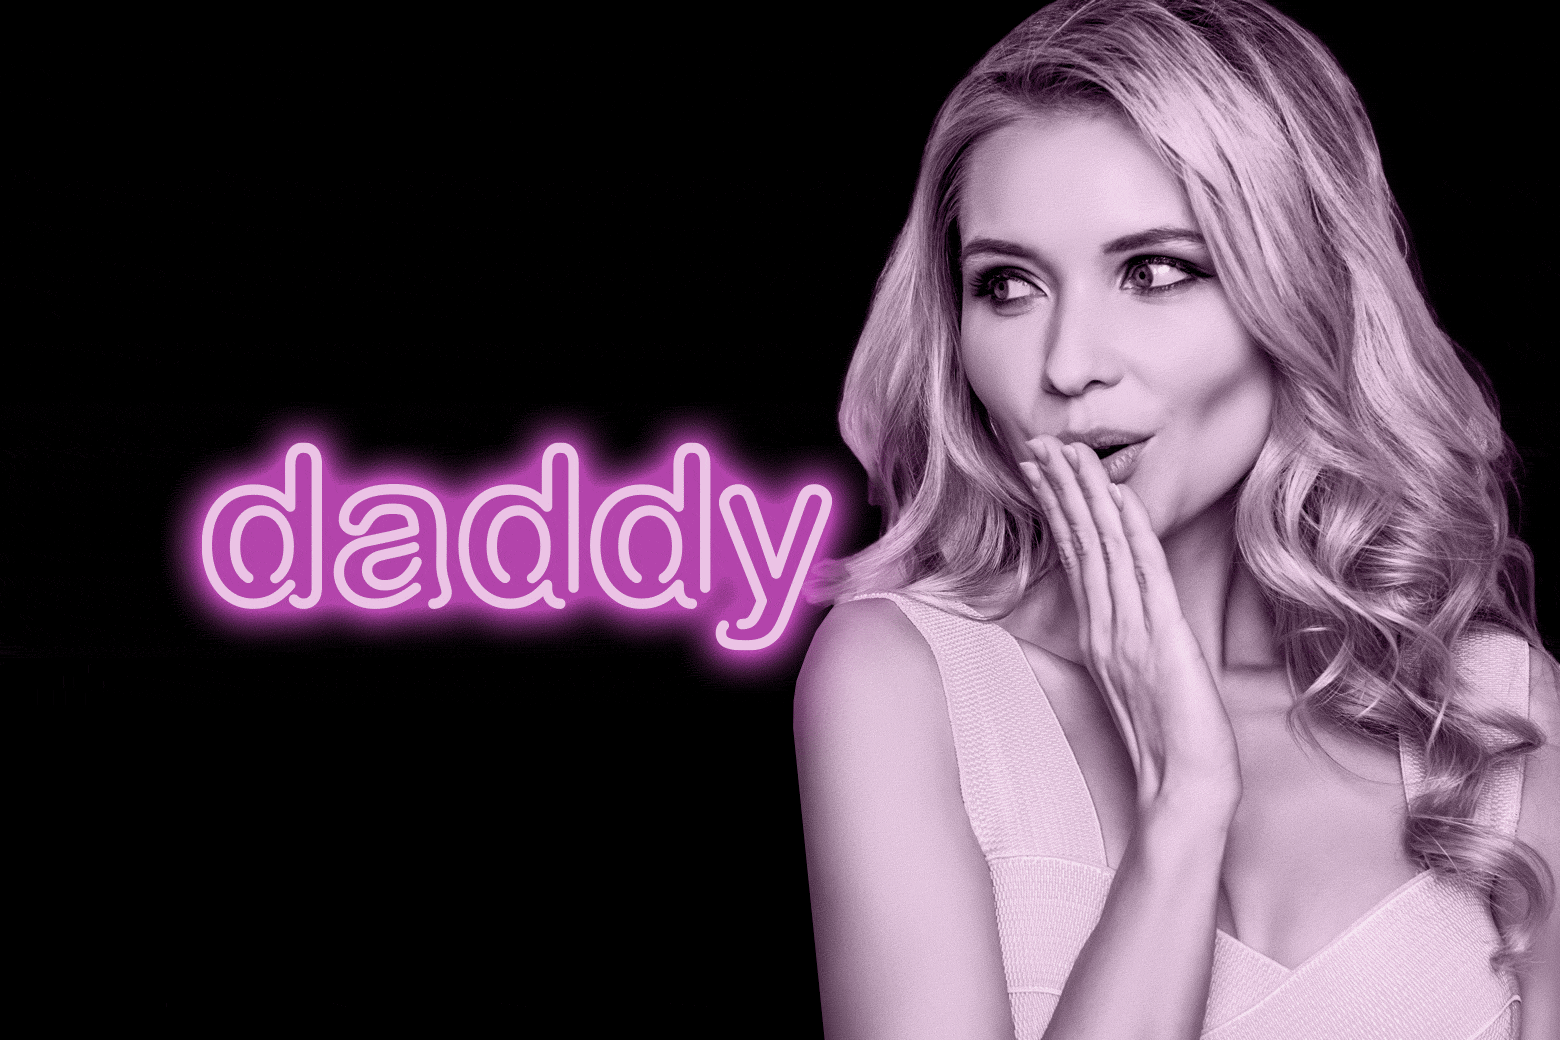 Woman covering her mouth with her hand and looking at a sign that says daddy.